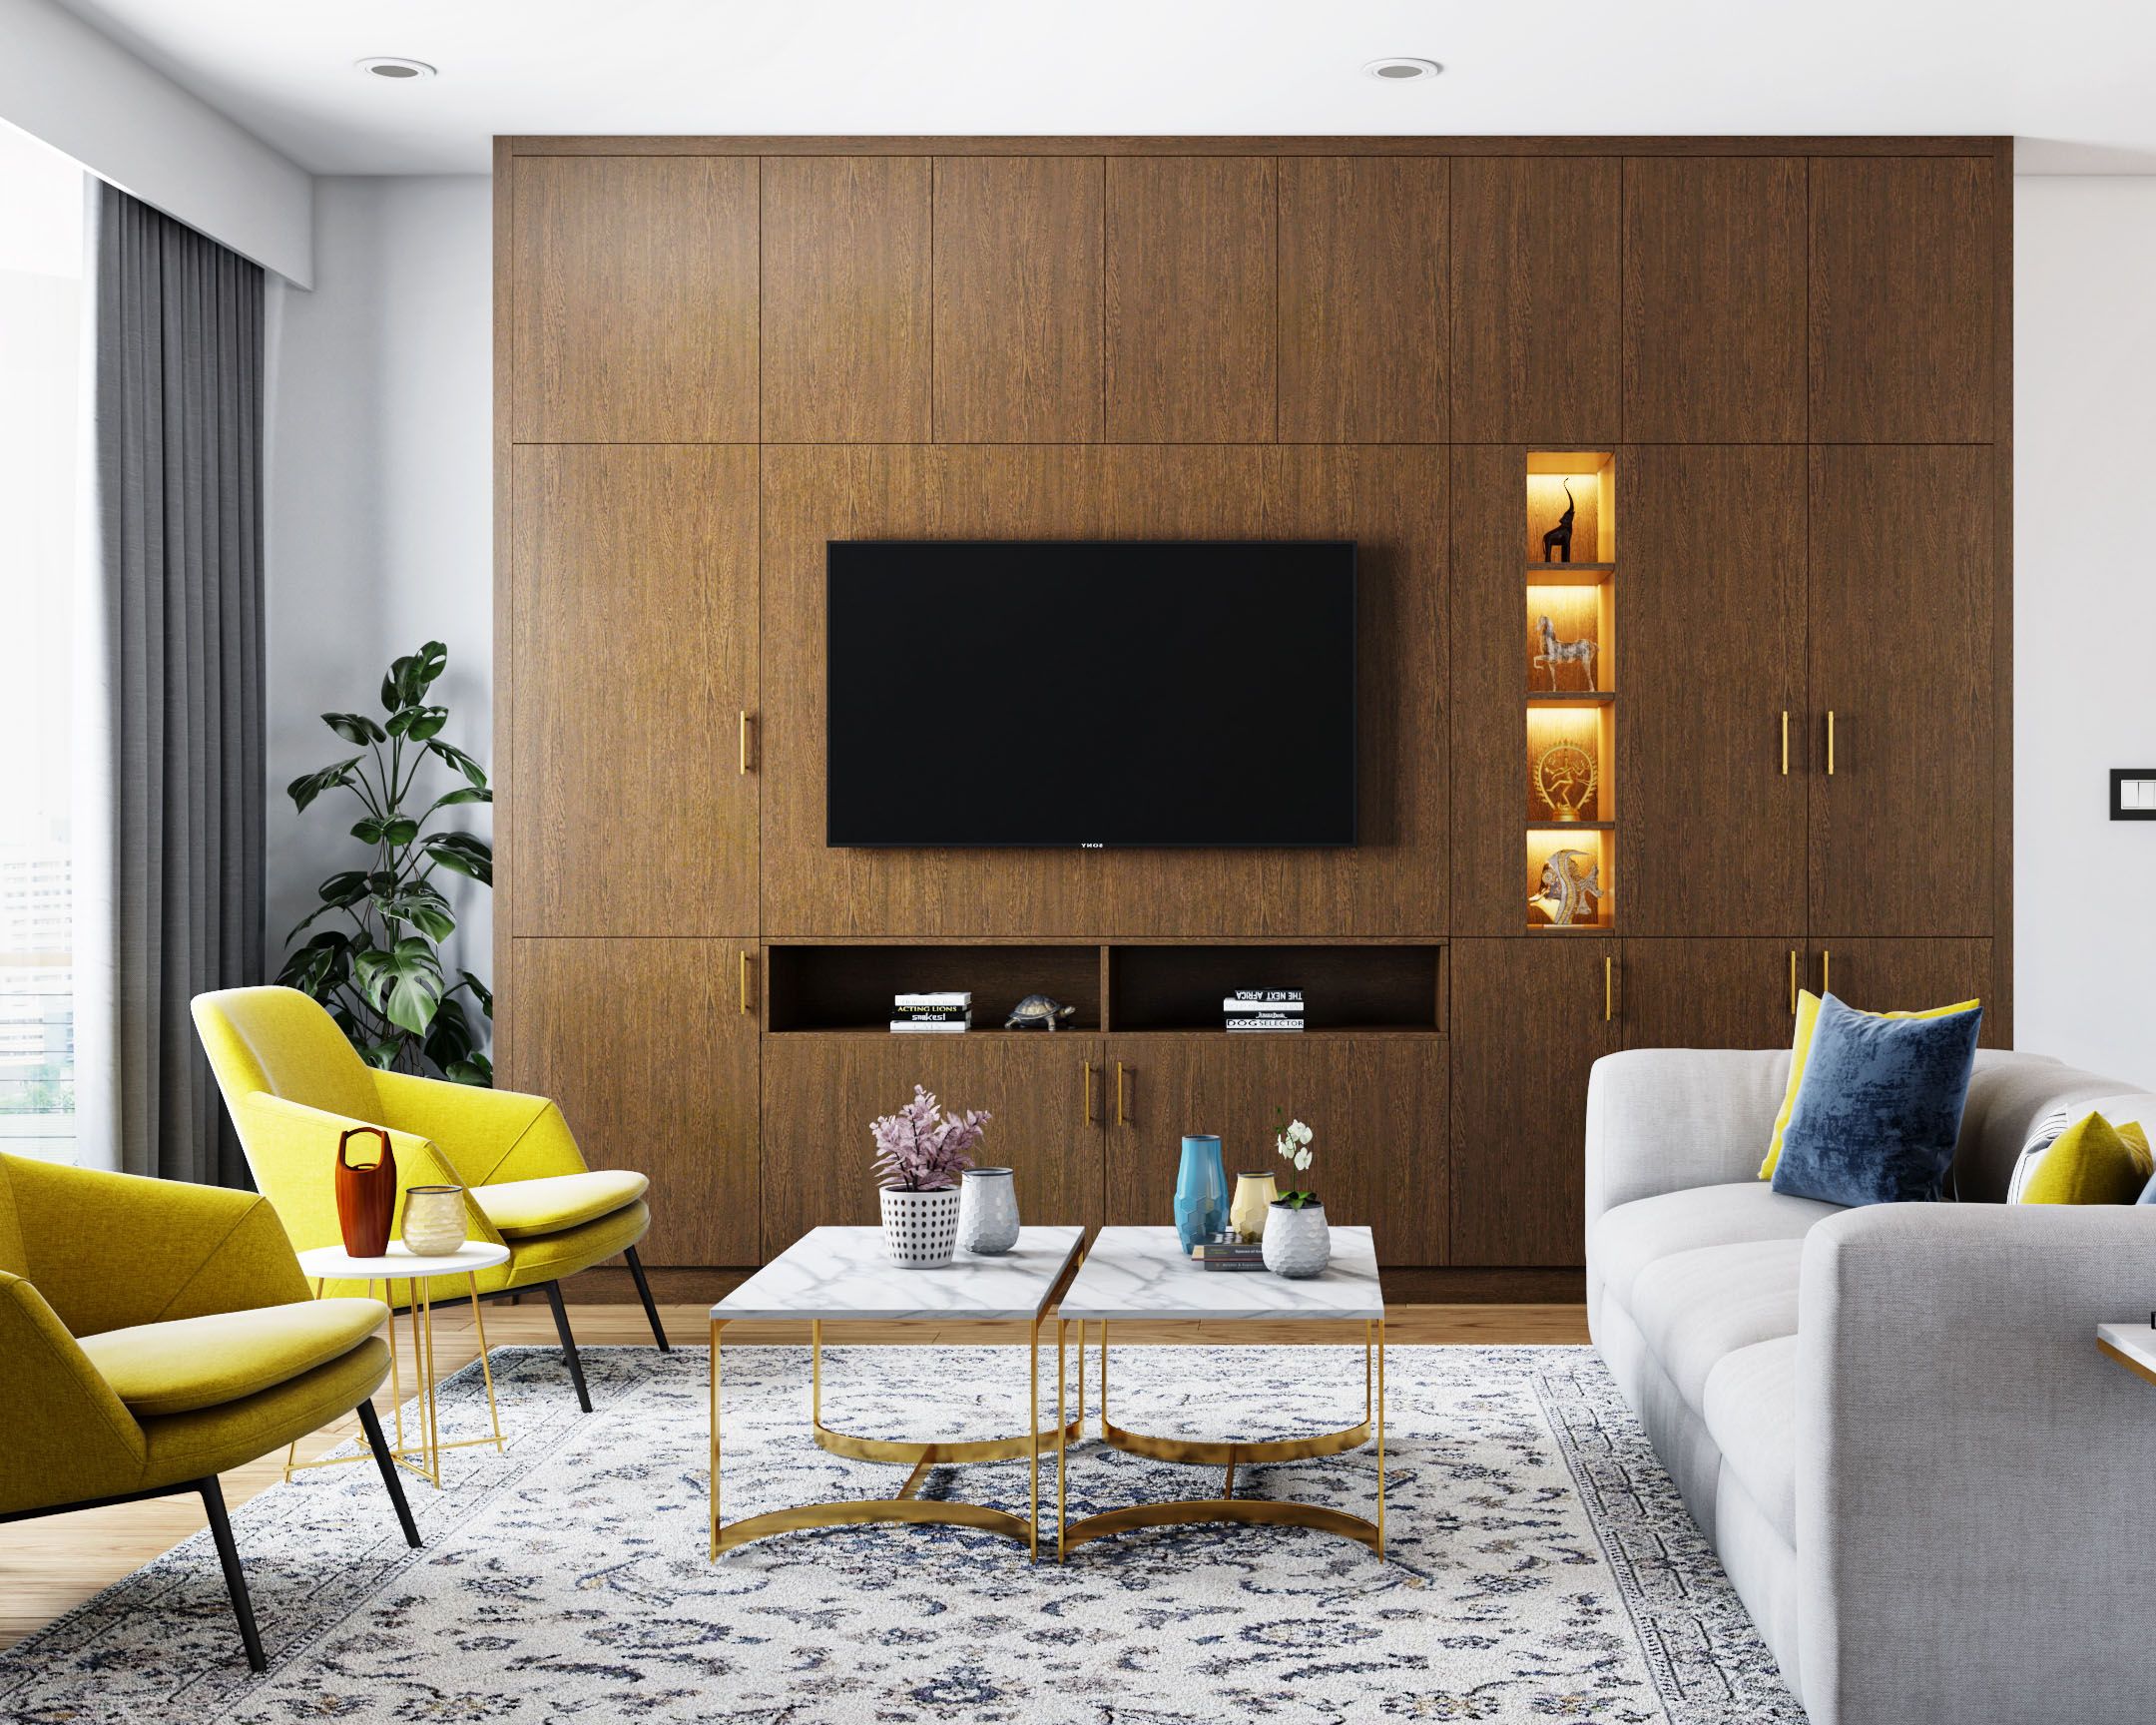 Contemporary Walnut Wood TV Cabinet Design With In-Built Shelves And Cabinets